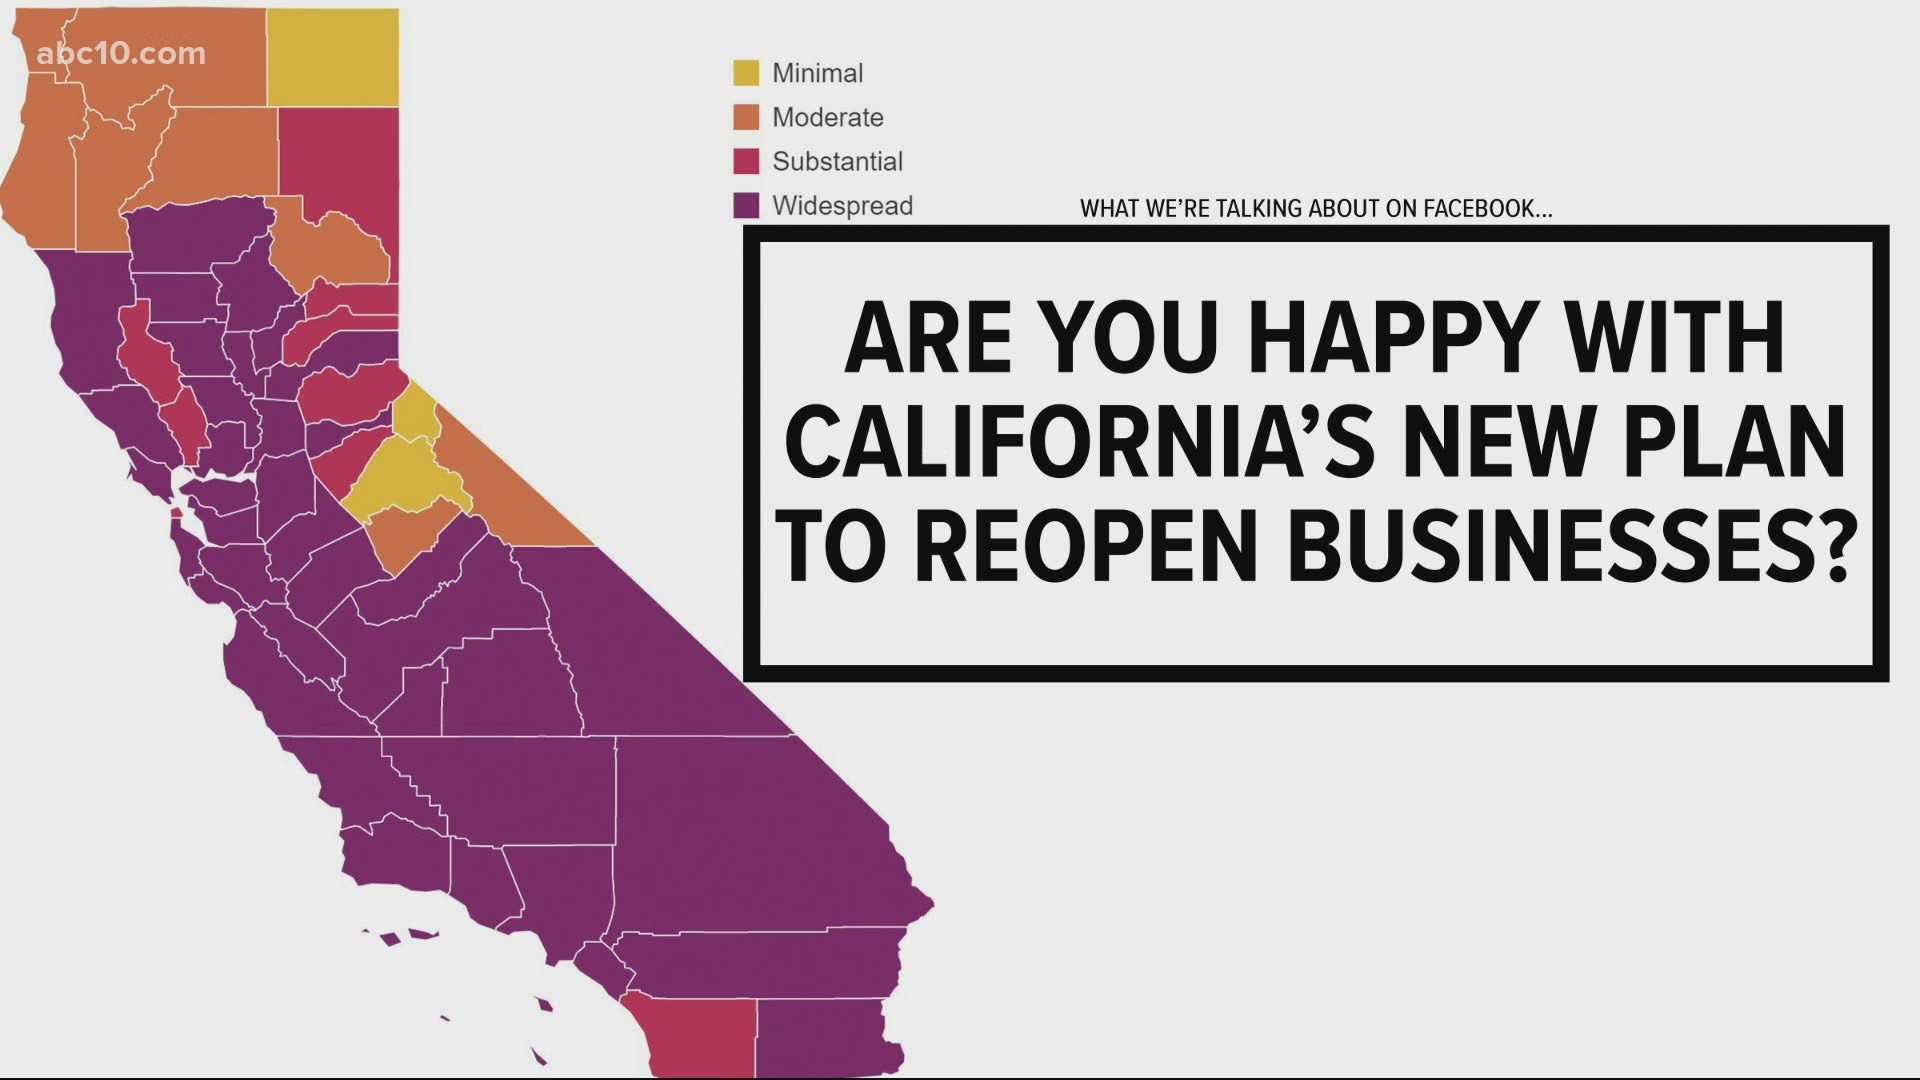 California launches a new color-coded tier plan to track which business are allowed to reopen under coronavirus restrictions.